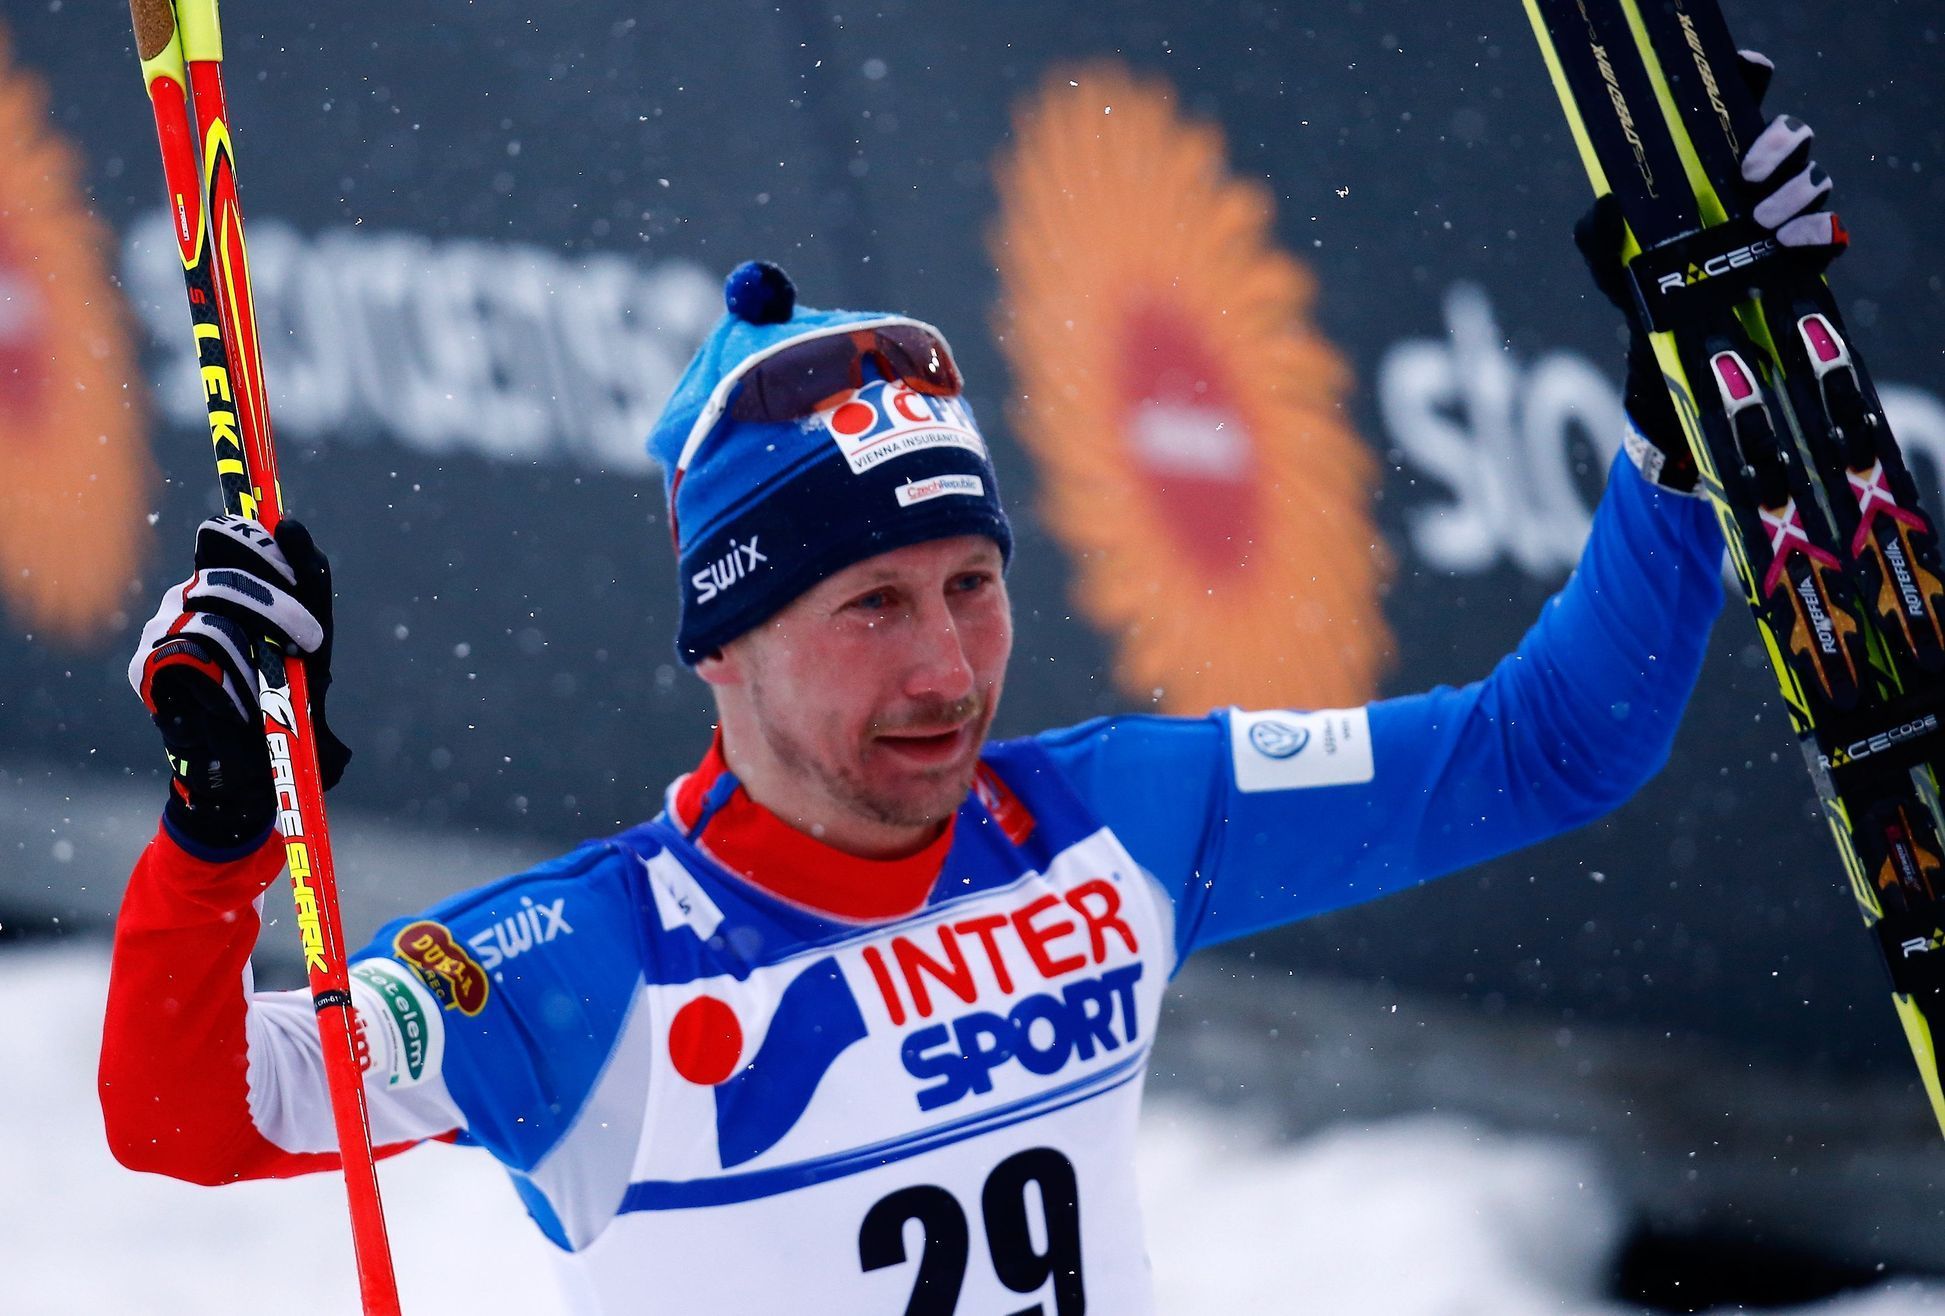 Bauer of the Czech Republic poses after the men's cross country 50 km mass start classic race at the Nordic World Ski Championships in Falun